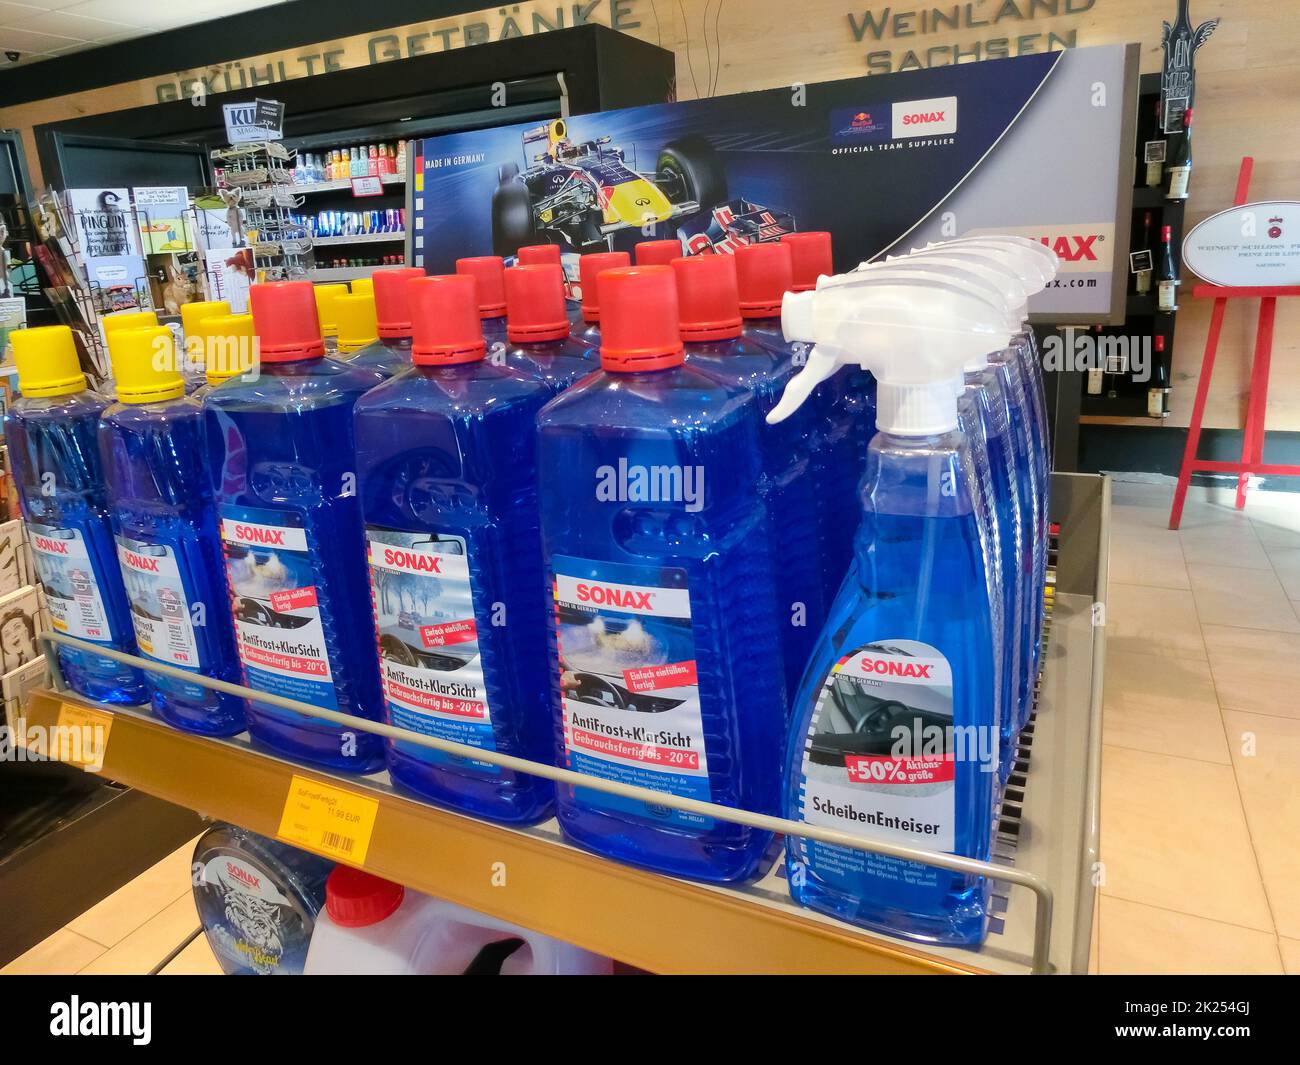 https://c8.alamy.com/comp/2K254GJ/dresden-germany-april-18-2022-shell-gas-station-sonax-products-in-the-store-windshield-washer-winter-defroster-2K254GJ.jpg